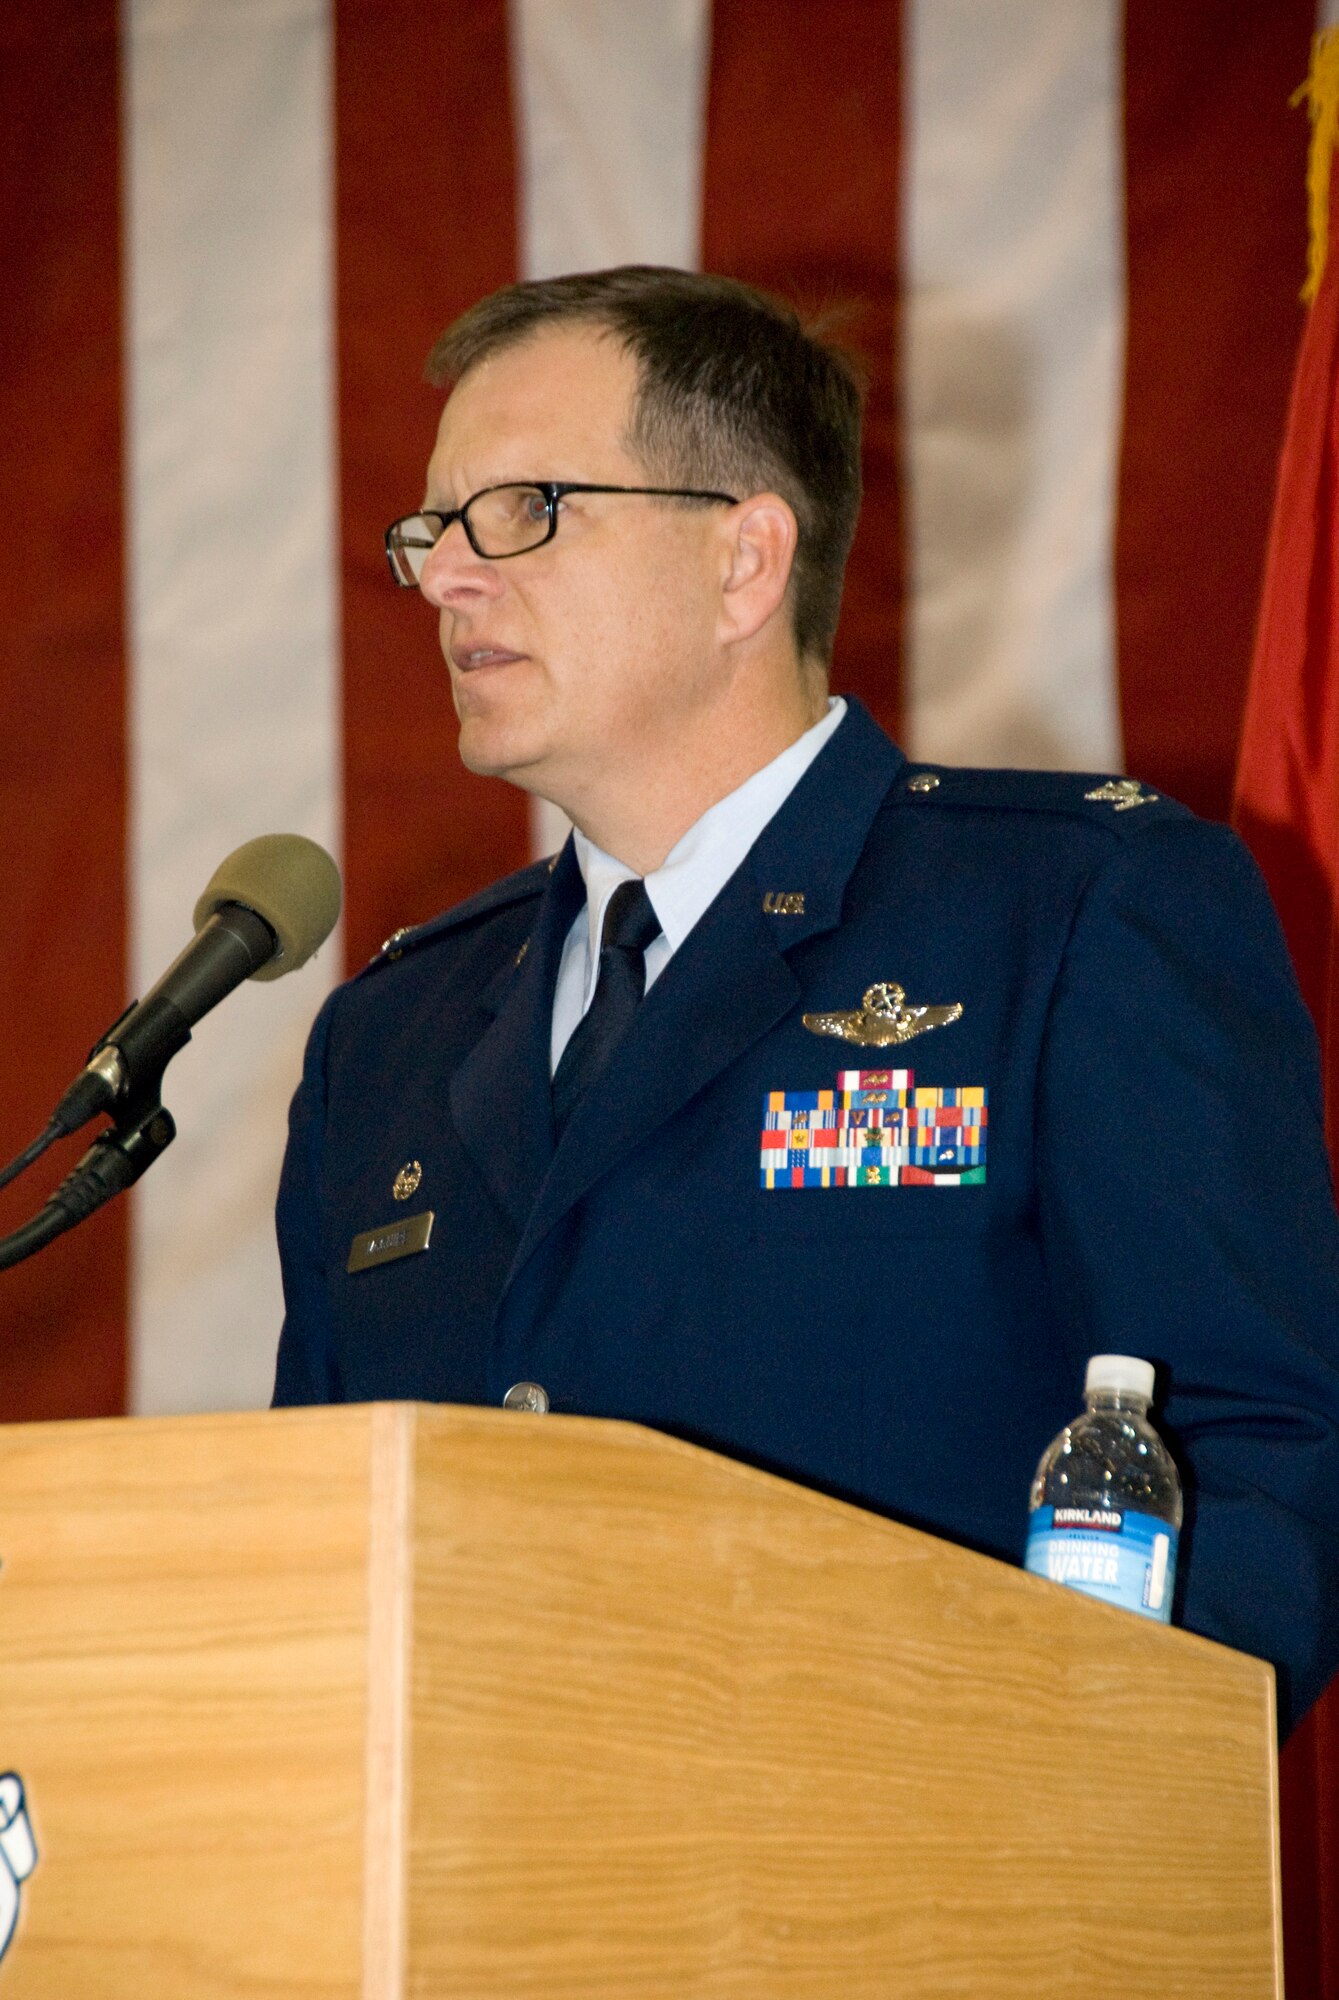 Col. Michael McGuire, the new 162nd Fighter Wing commander, addresses the wing and guests at the assumption of command ceremony Jan. 8. (U.S. Air Force photo/Master Sgt. Dave Neve)